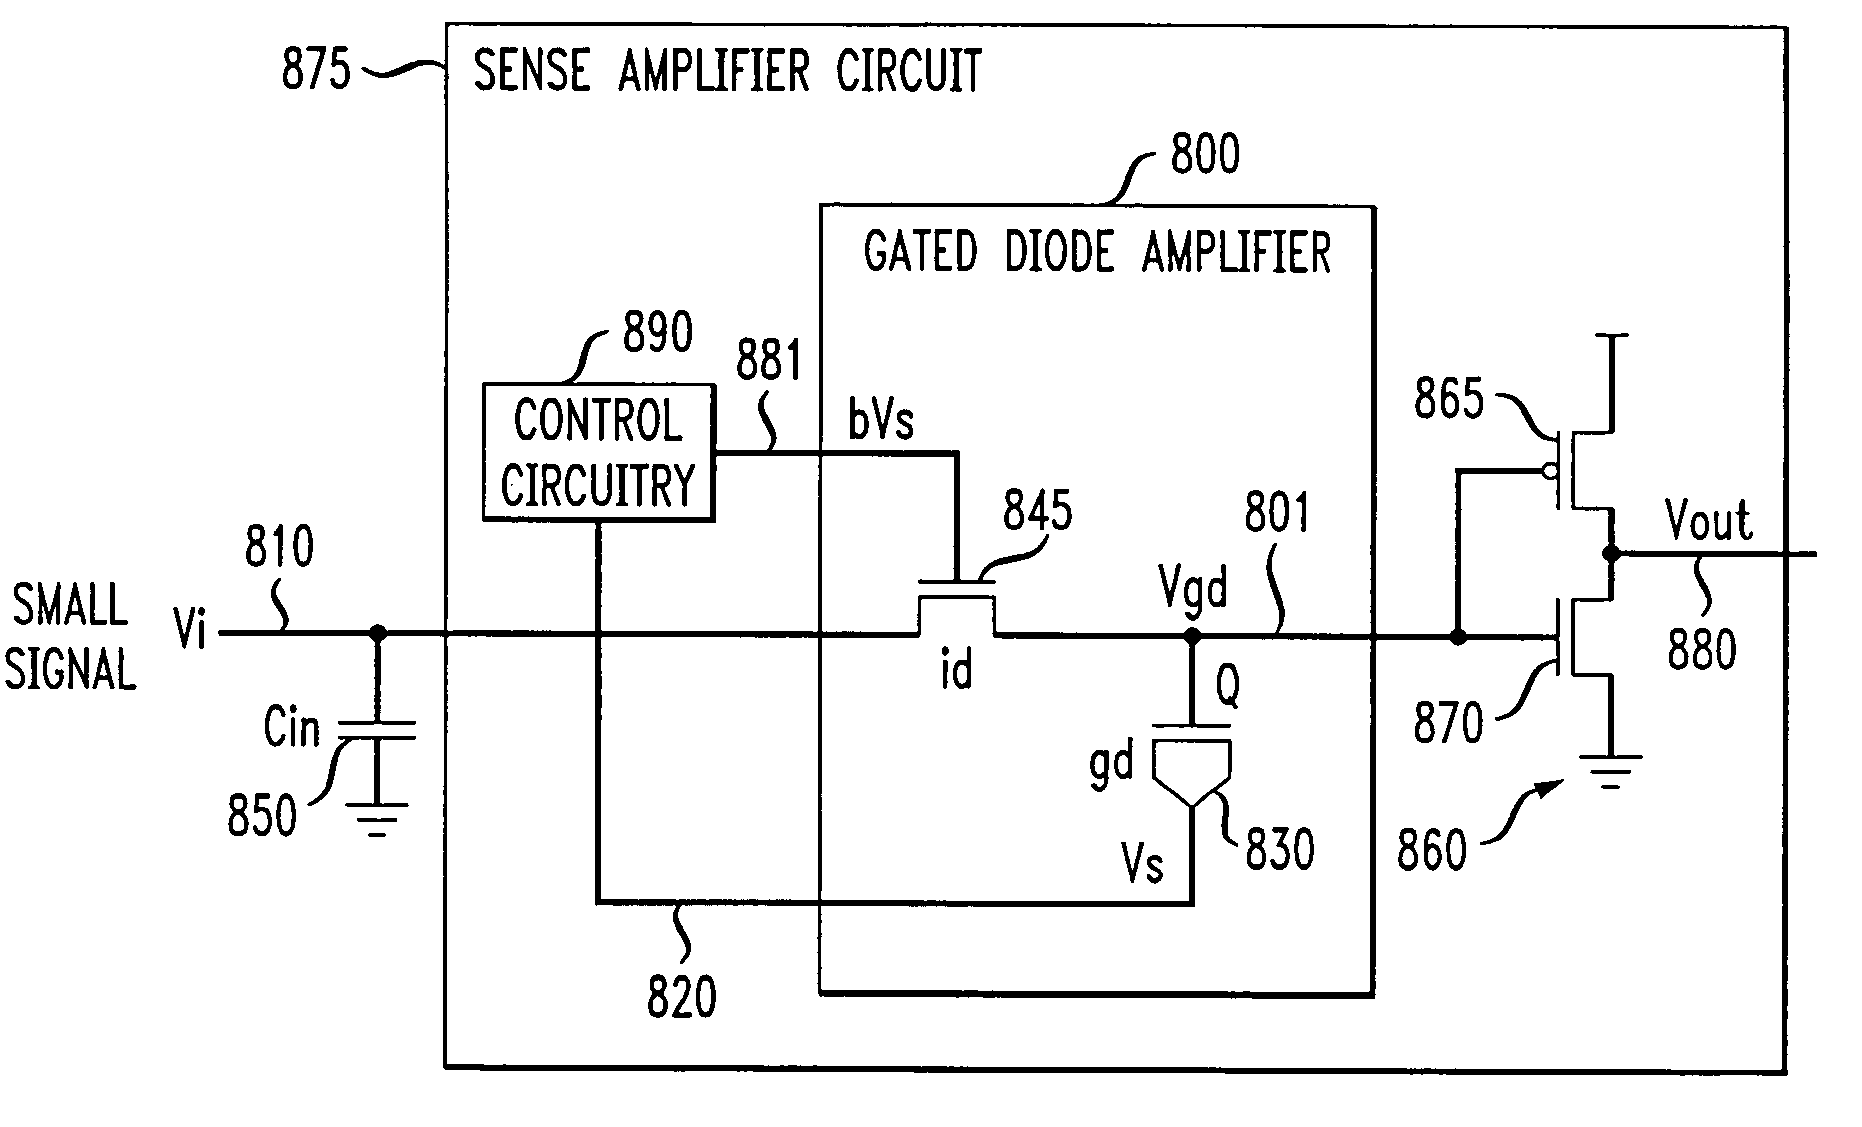 Sense amplifier circuits and high speed latch circuits using gated diodes